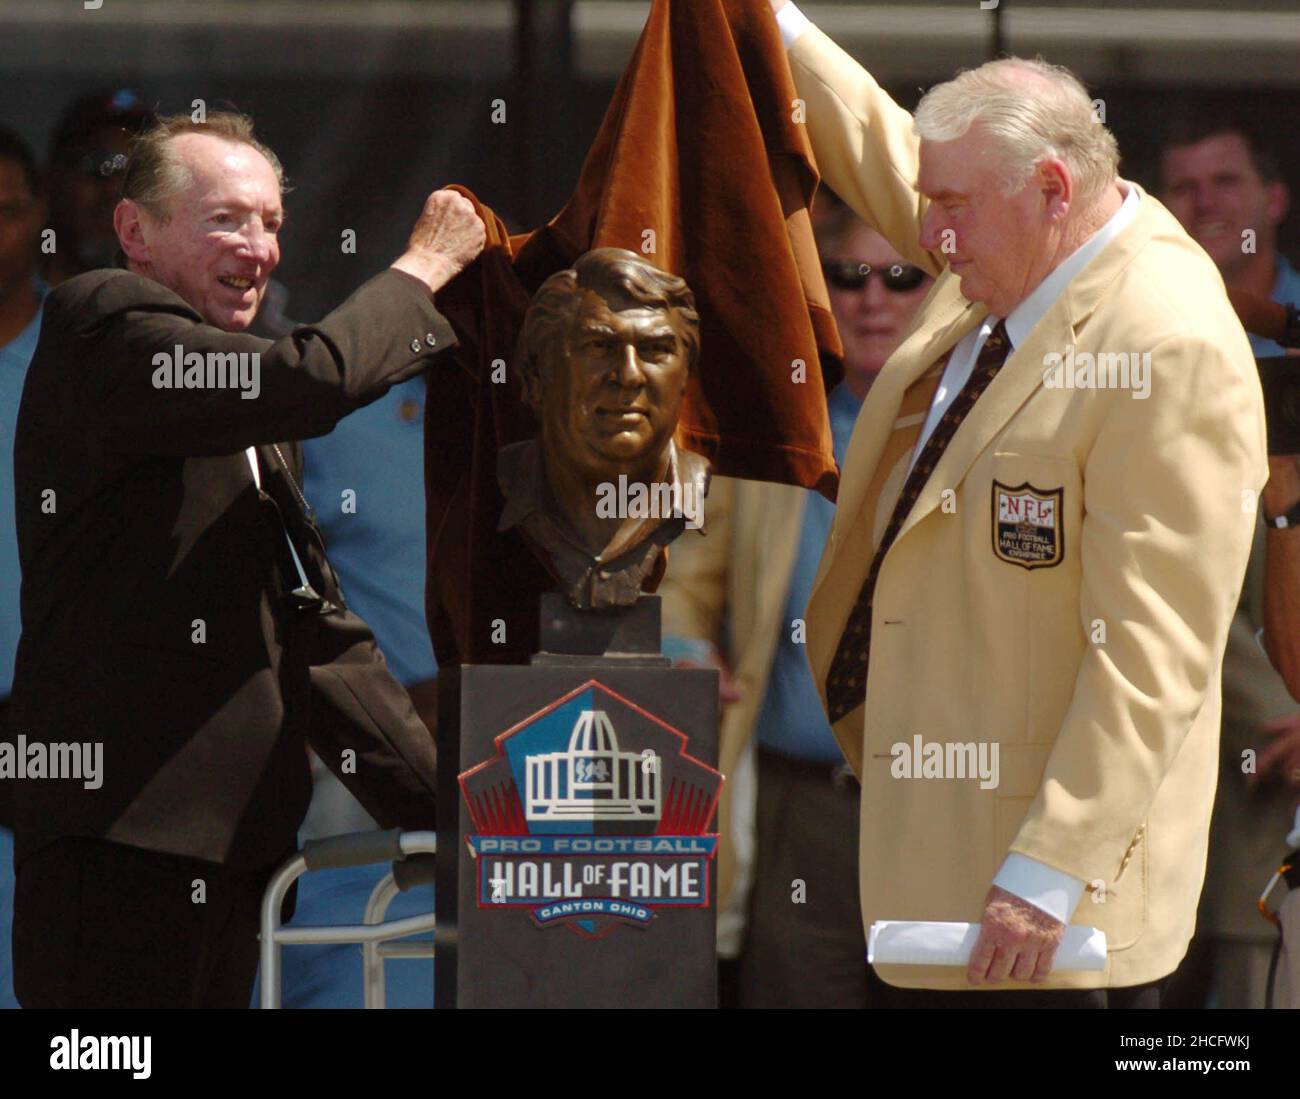 Canton, USA. 05th Aug, 2006. John Madden is joined by Al Davis in unveiling Madden's bust at the Pro Football Hall of Fame induction ceremony on Saturday, August 5, 2006, in Canton, Ohio. (Photo by JBob Larson/Contra Costa Times/MCT/Sipa USA) Credit: Sipa USA/Alamy Live News Stock Photo